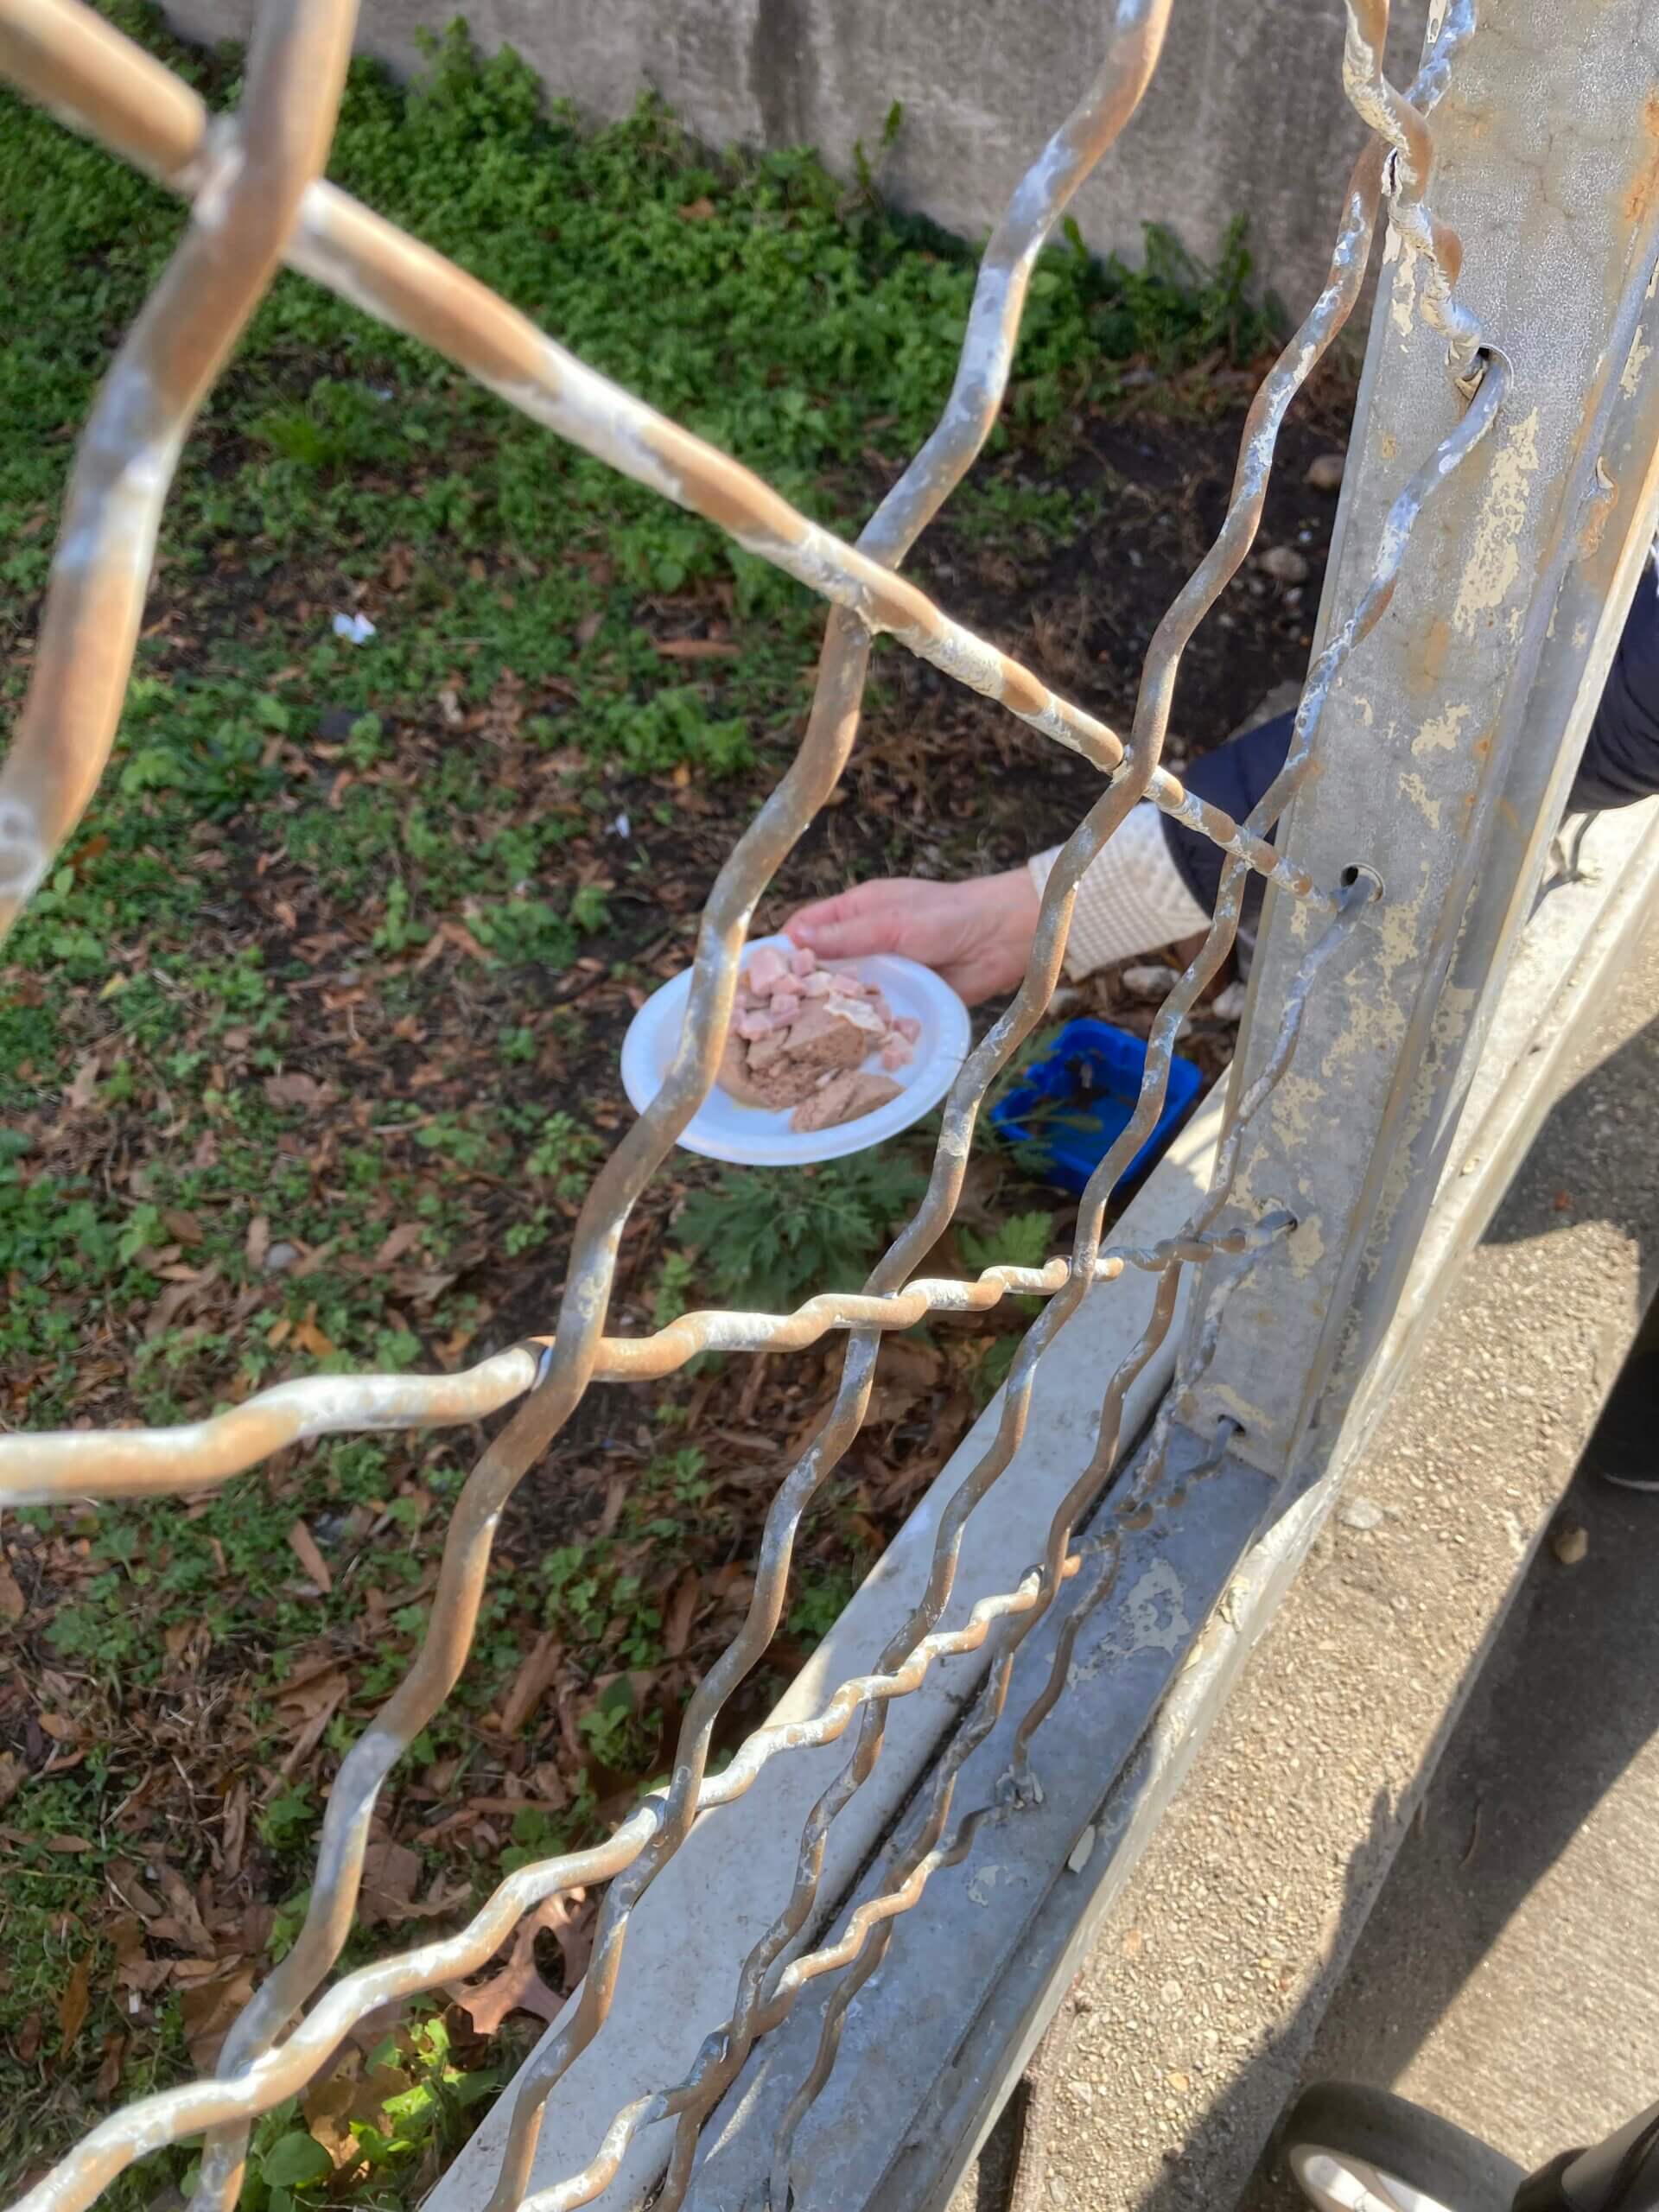 A woman's hand reaches behind a chain link fence to place a dish of wet cat food on the ground.